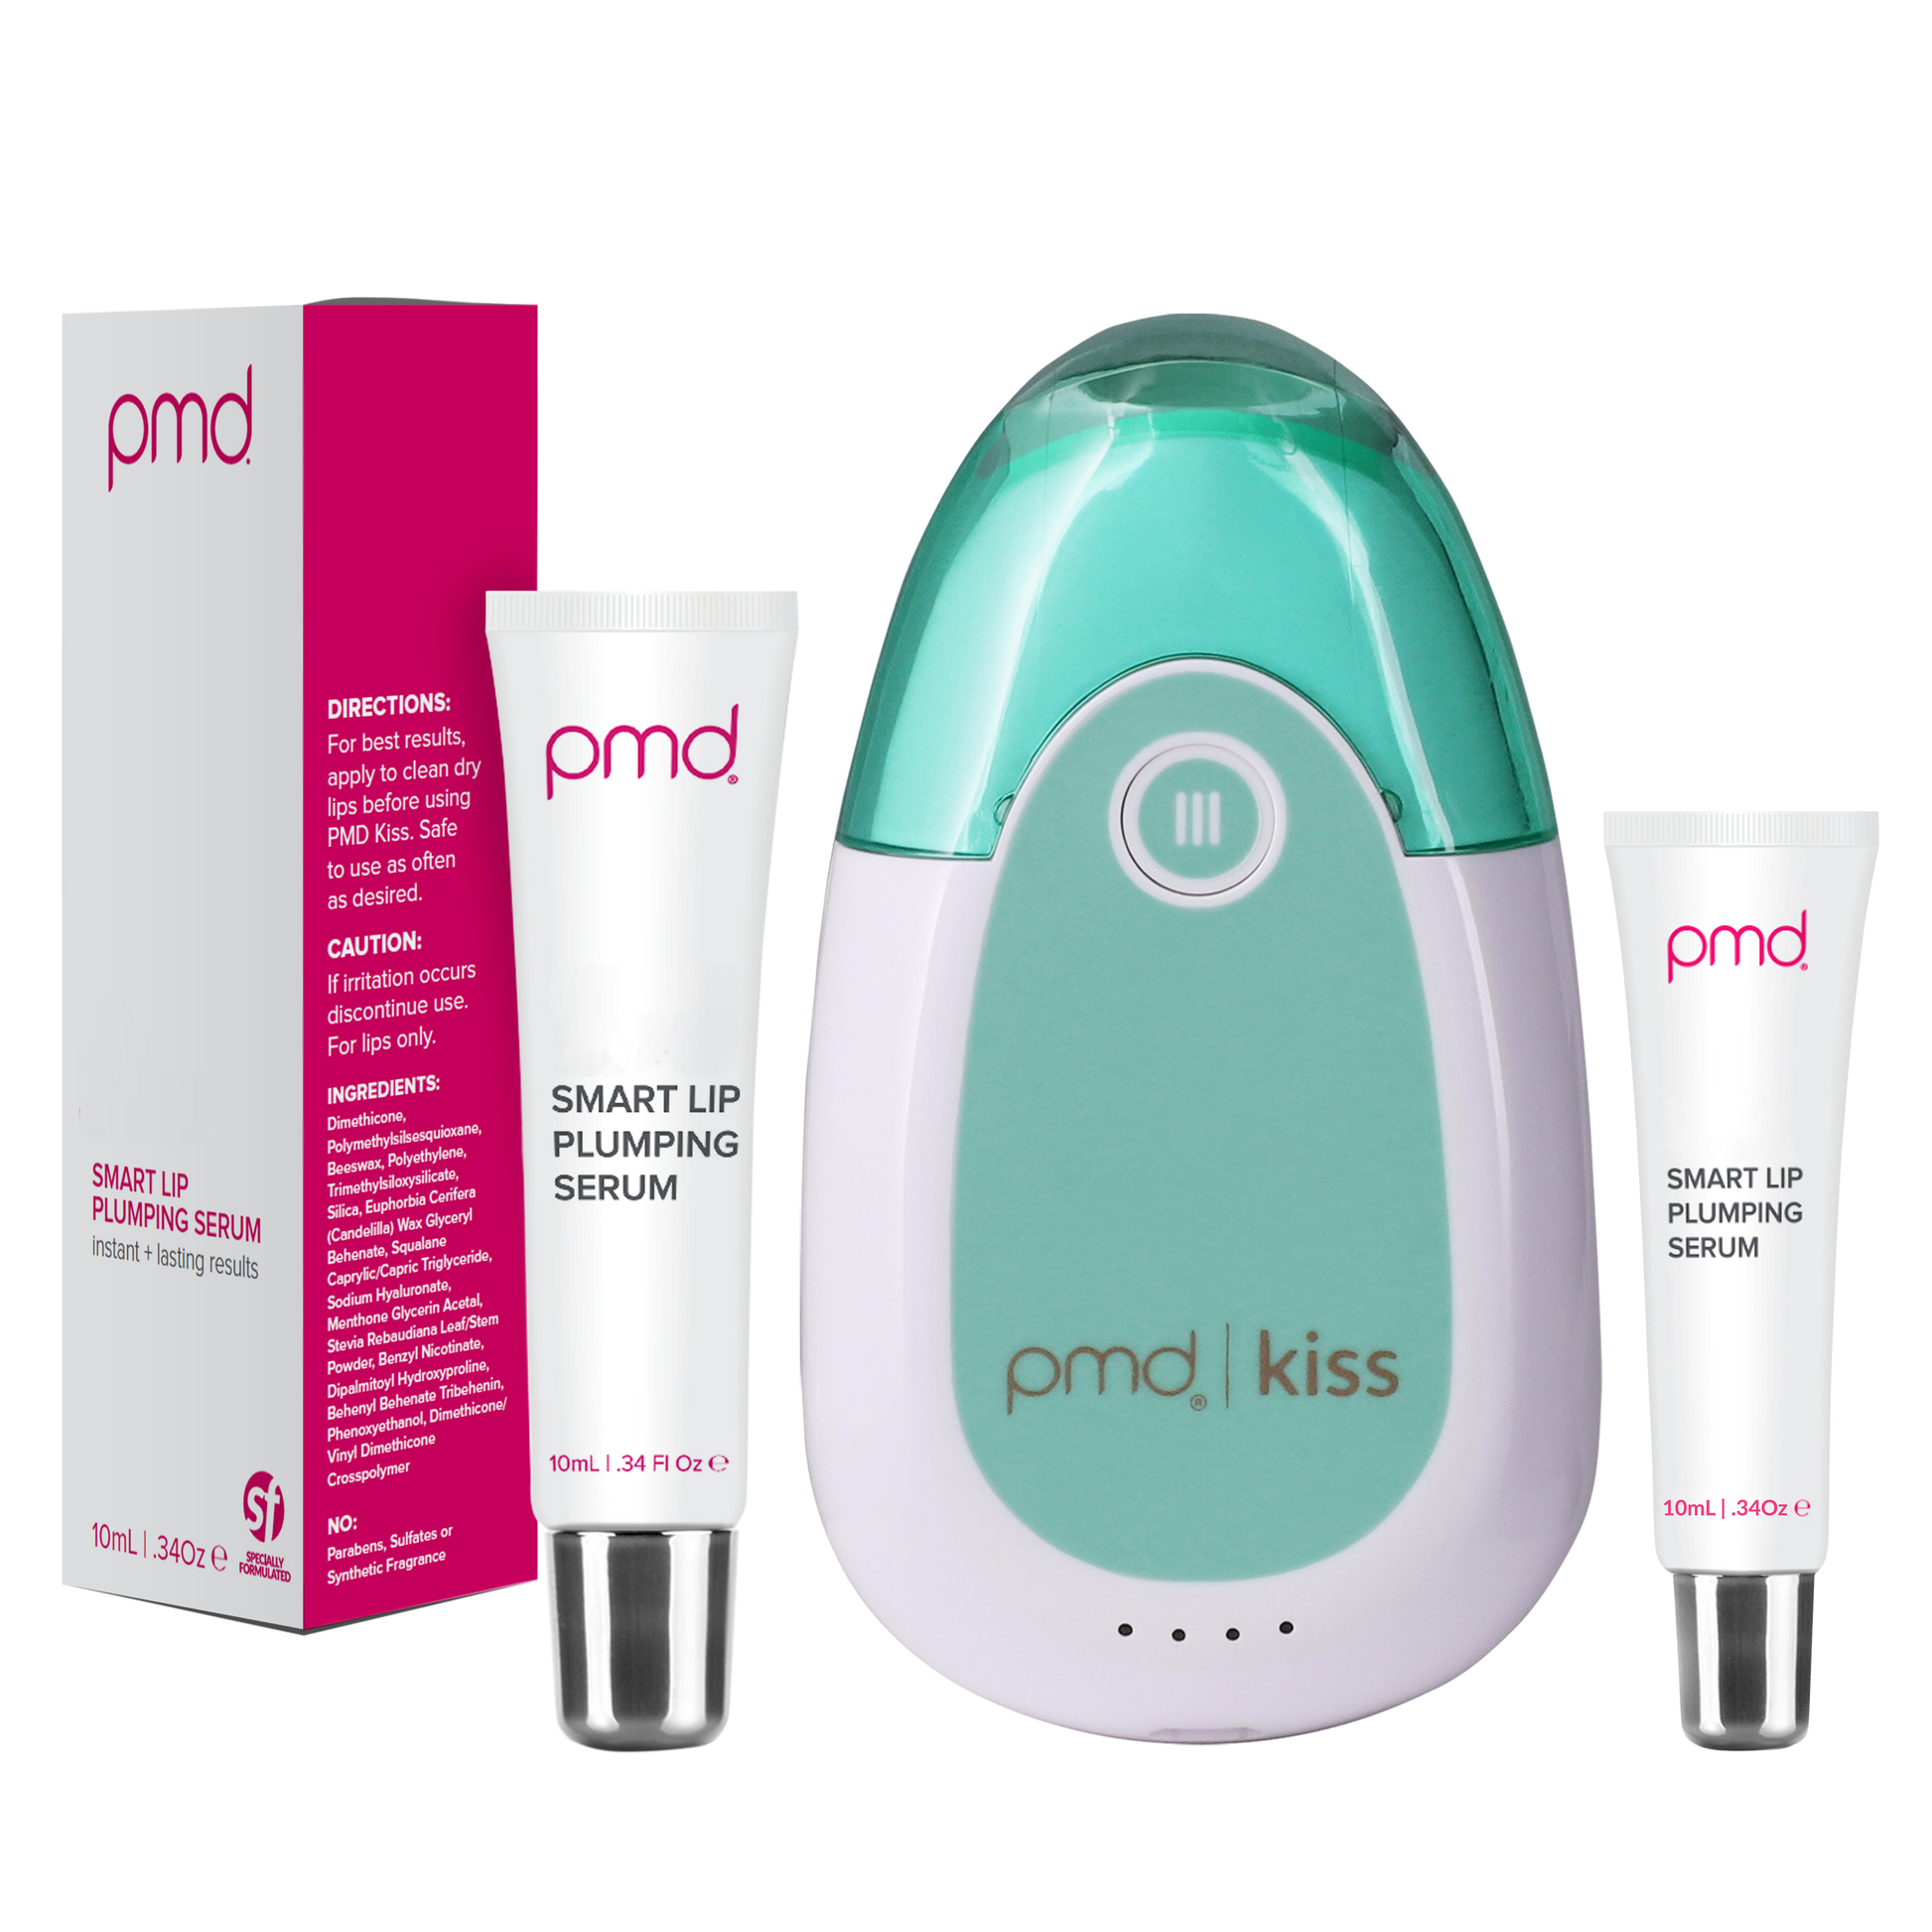 BNDL_plumped_teal?PMD Kiss System in Teal & Smart Lip Plumping Serum